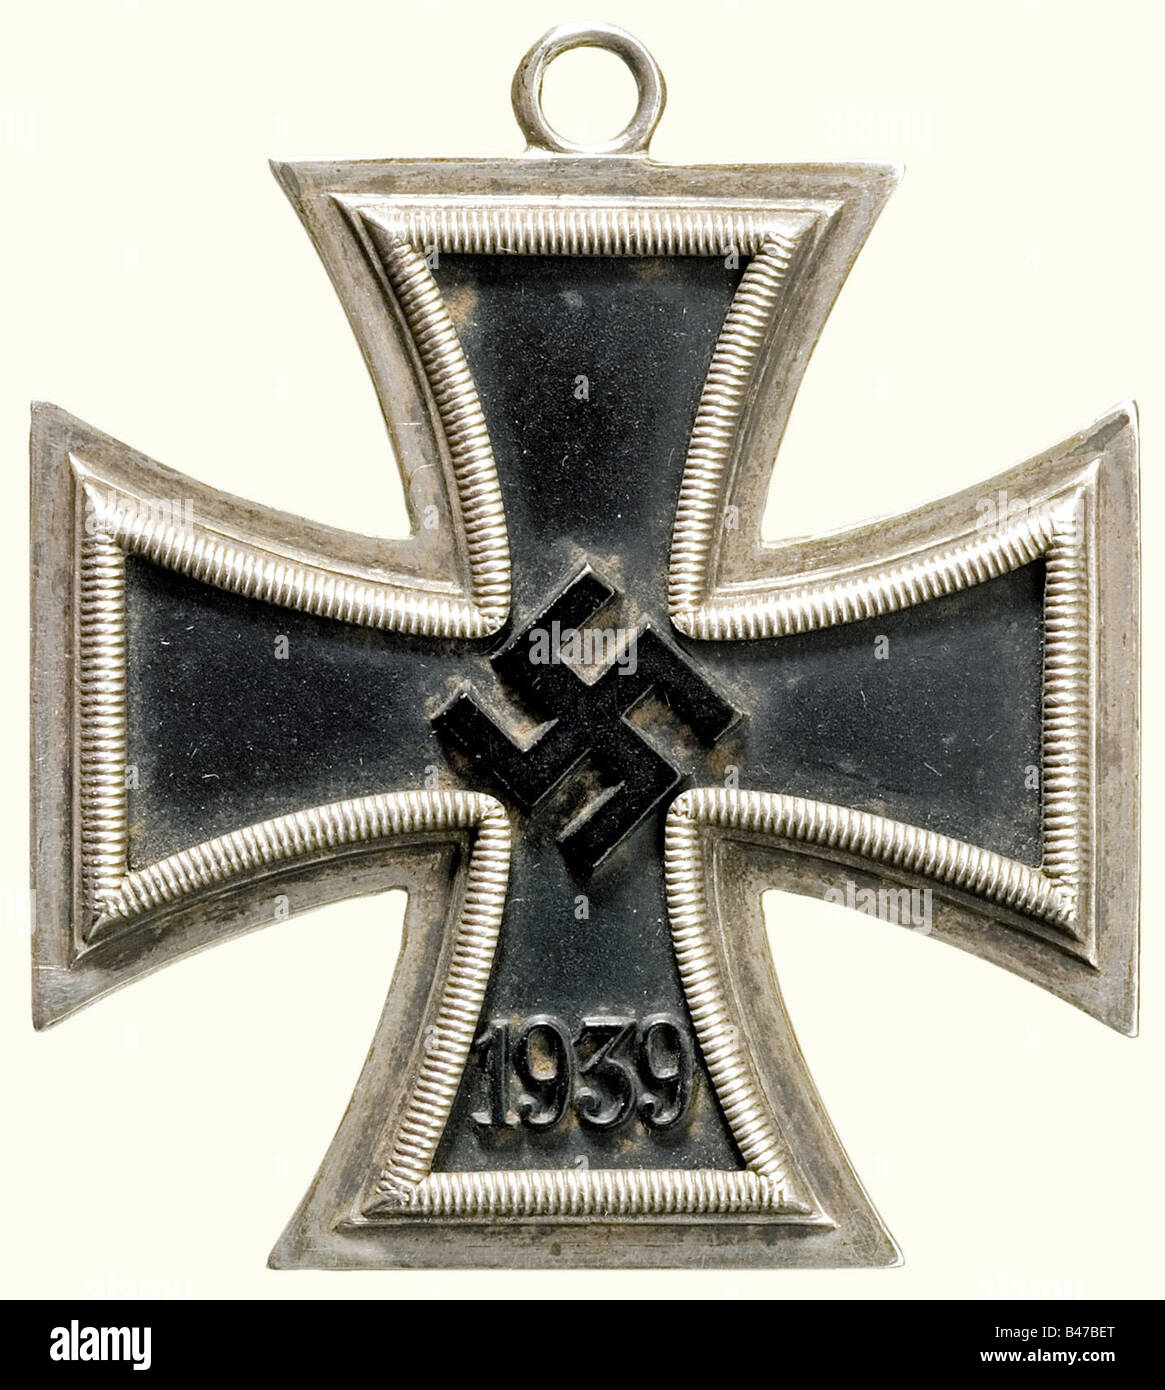 Major General Friedrich Z., a Knight's Cross of the Iron Cross on 2 June 1942 as Commanding Officer, 113th Infantry Division Knight's Cross of the Iron Cross of 1939, iron core with rim-high swastika, silver frame with reverse stamped '800' and L/12 for C.E. Juncker. Weight 33.3 g. Suspension ring missing. Included is a non-customized piece of ribbon, circa 40 cm in typical later light-red colour (OEK 3821). historic, historical, 1930s, 1930s, 20th century, army, armies, armed forces, military, militaria, object, objects, stills, clipping, clippings, cut out, c, Stock Photo